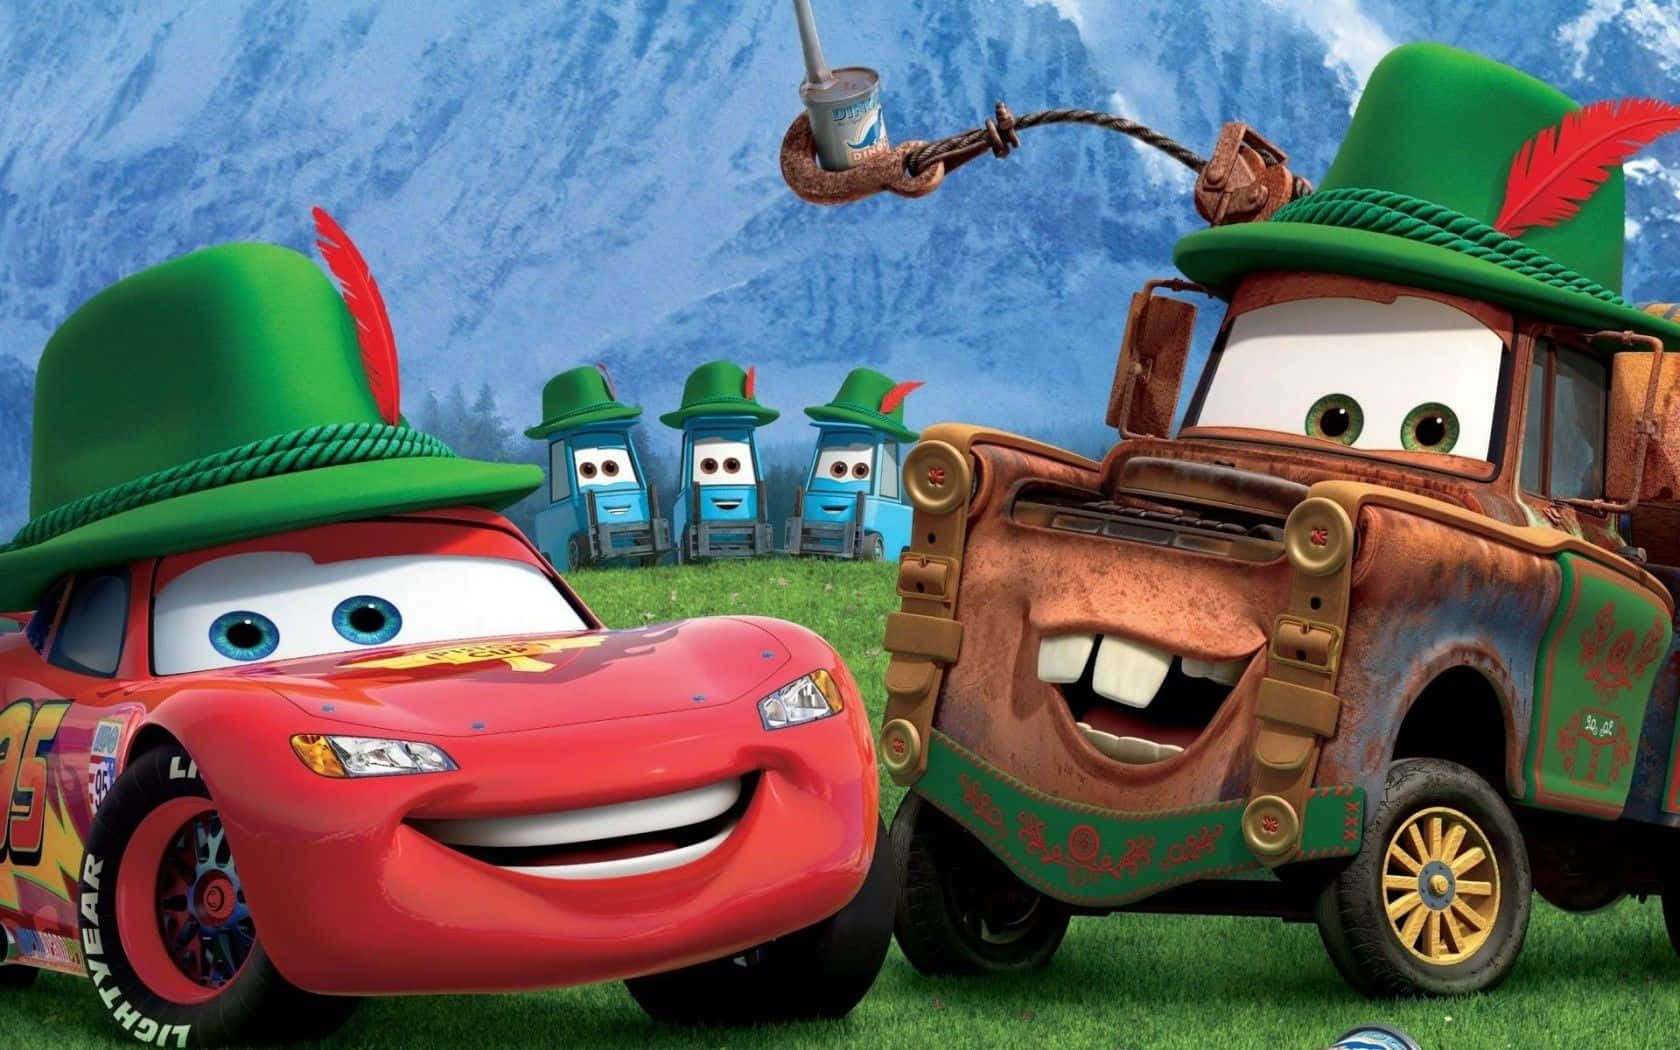 Disney Cars - A Cartoon With Two Cars In A Green Hat